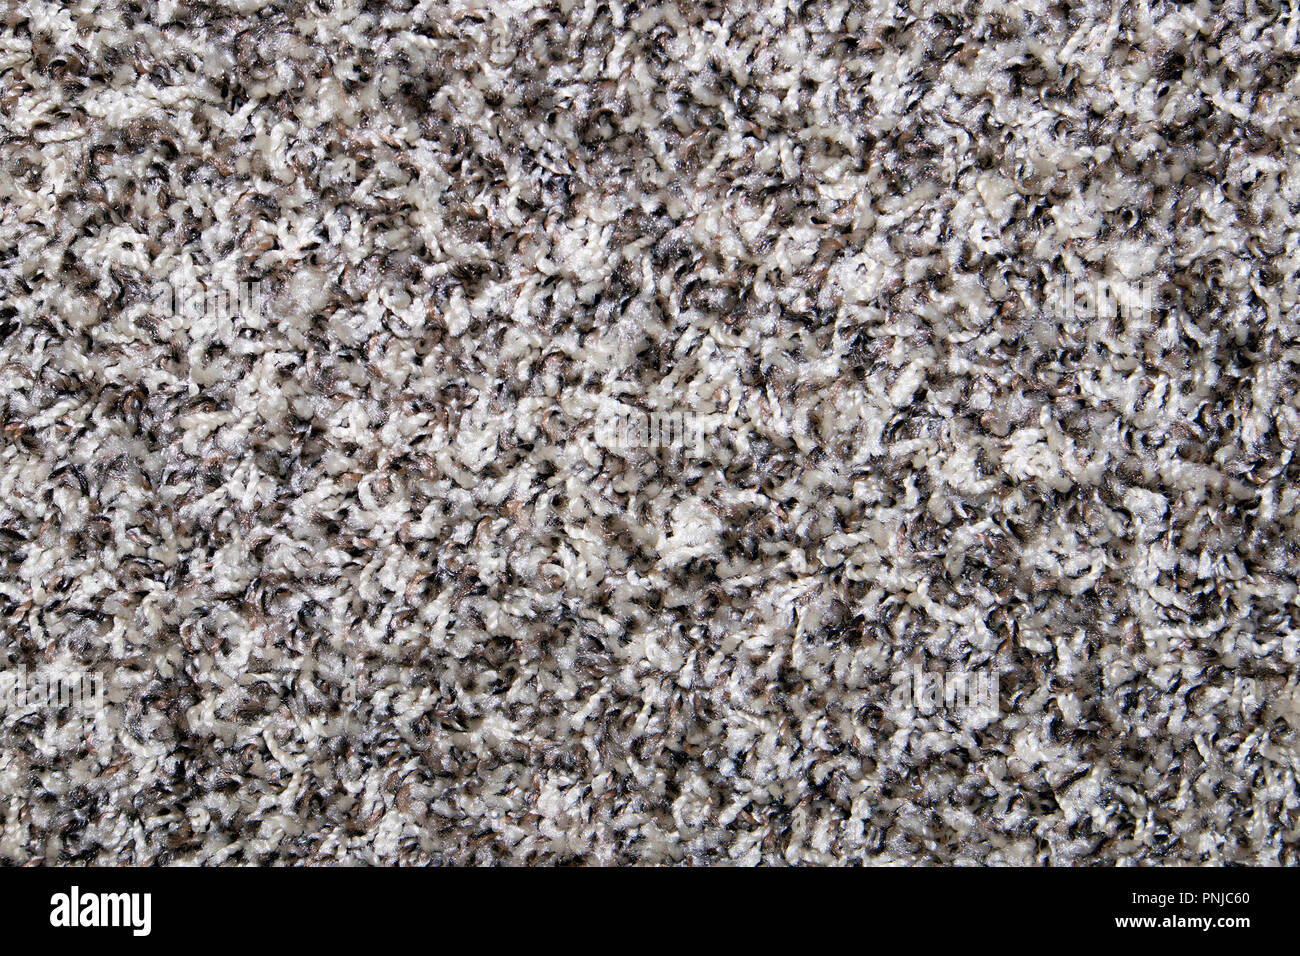 Grey synthetic short-napped floor carpet covering, may be used as background or texture Stock Photo